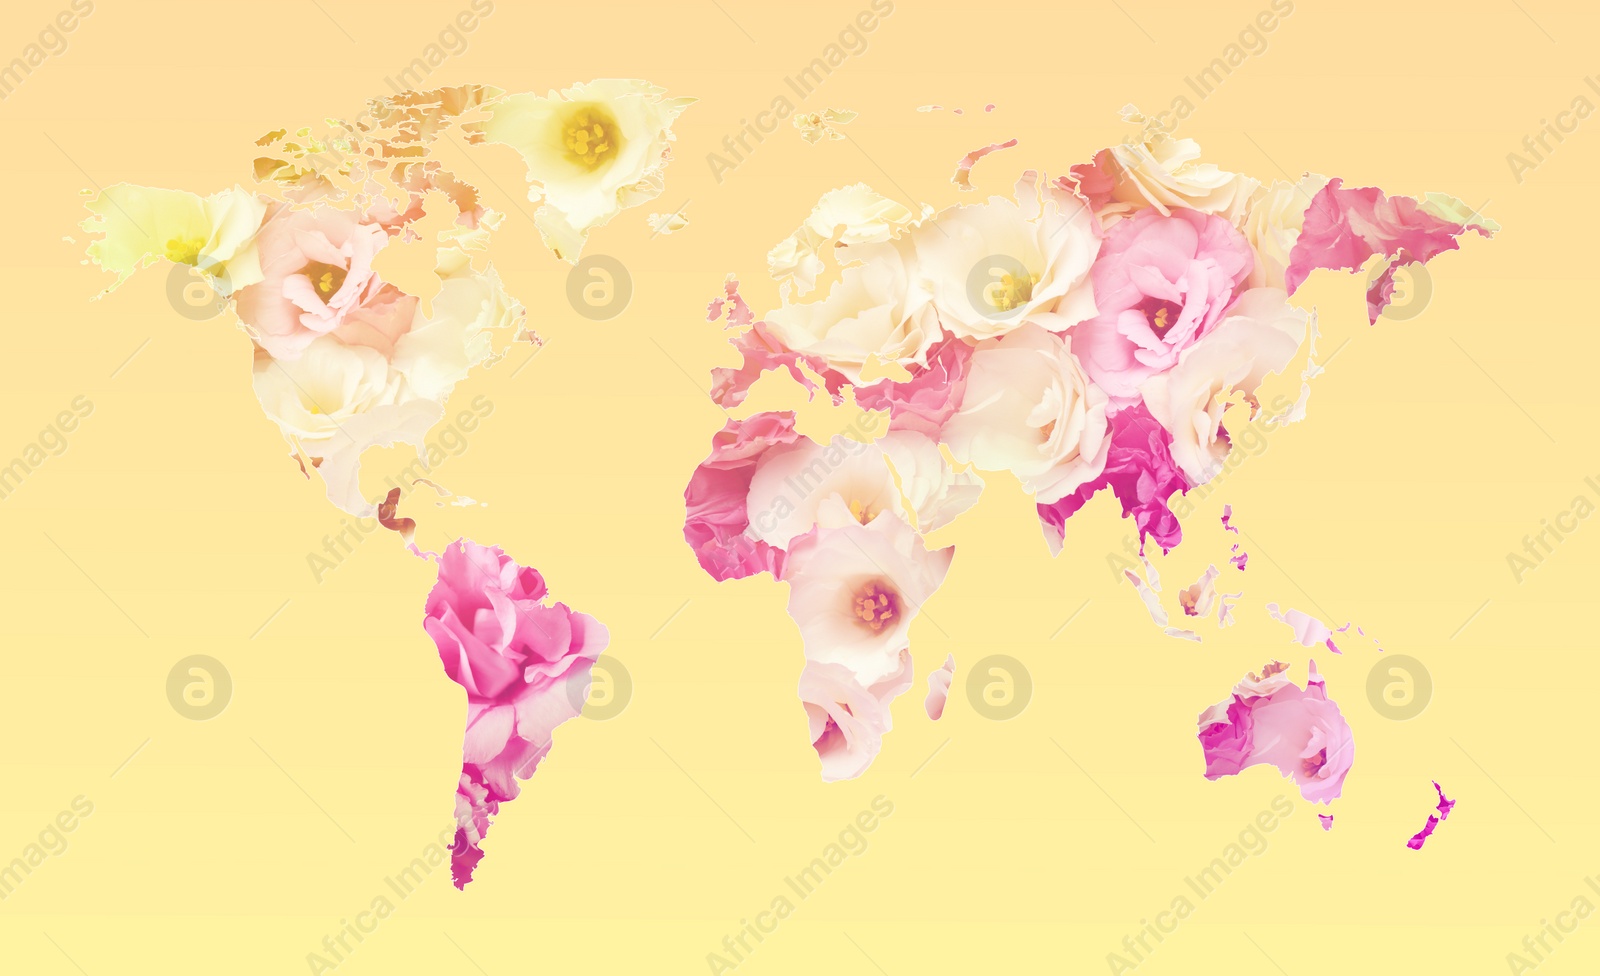 Image of World map made of beautiful flowers on pale yellow background, banner design